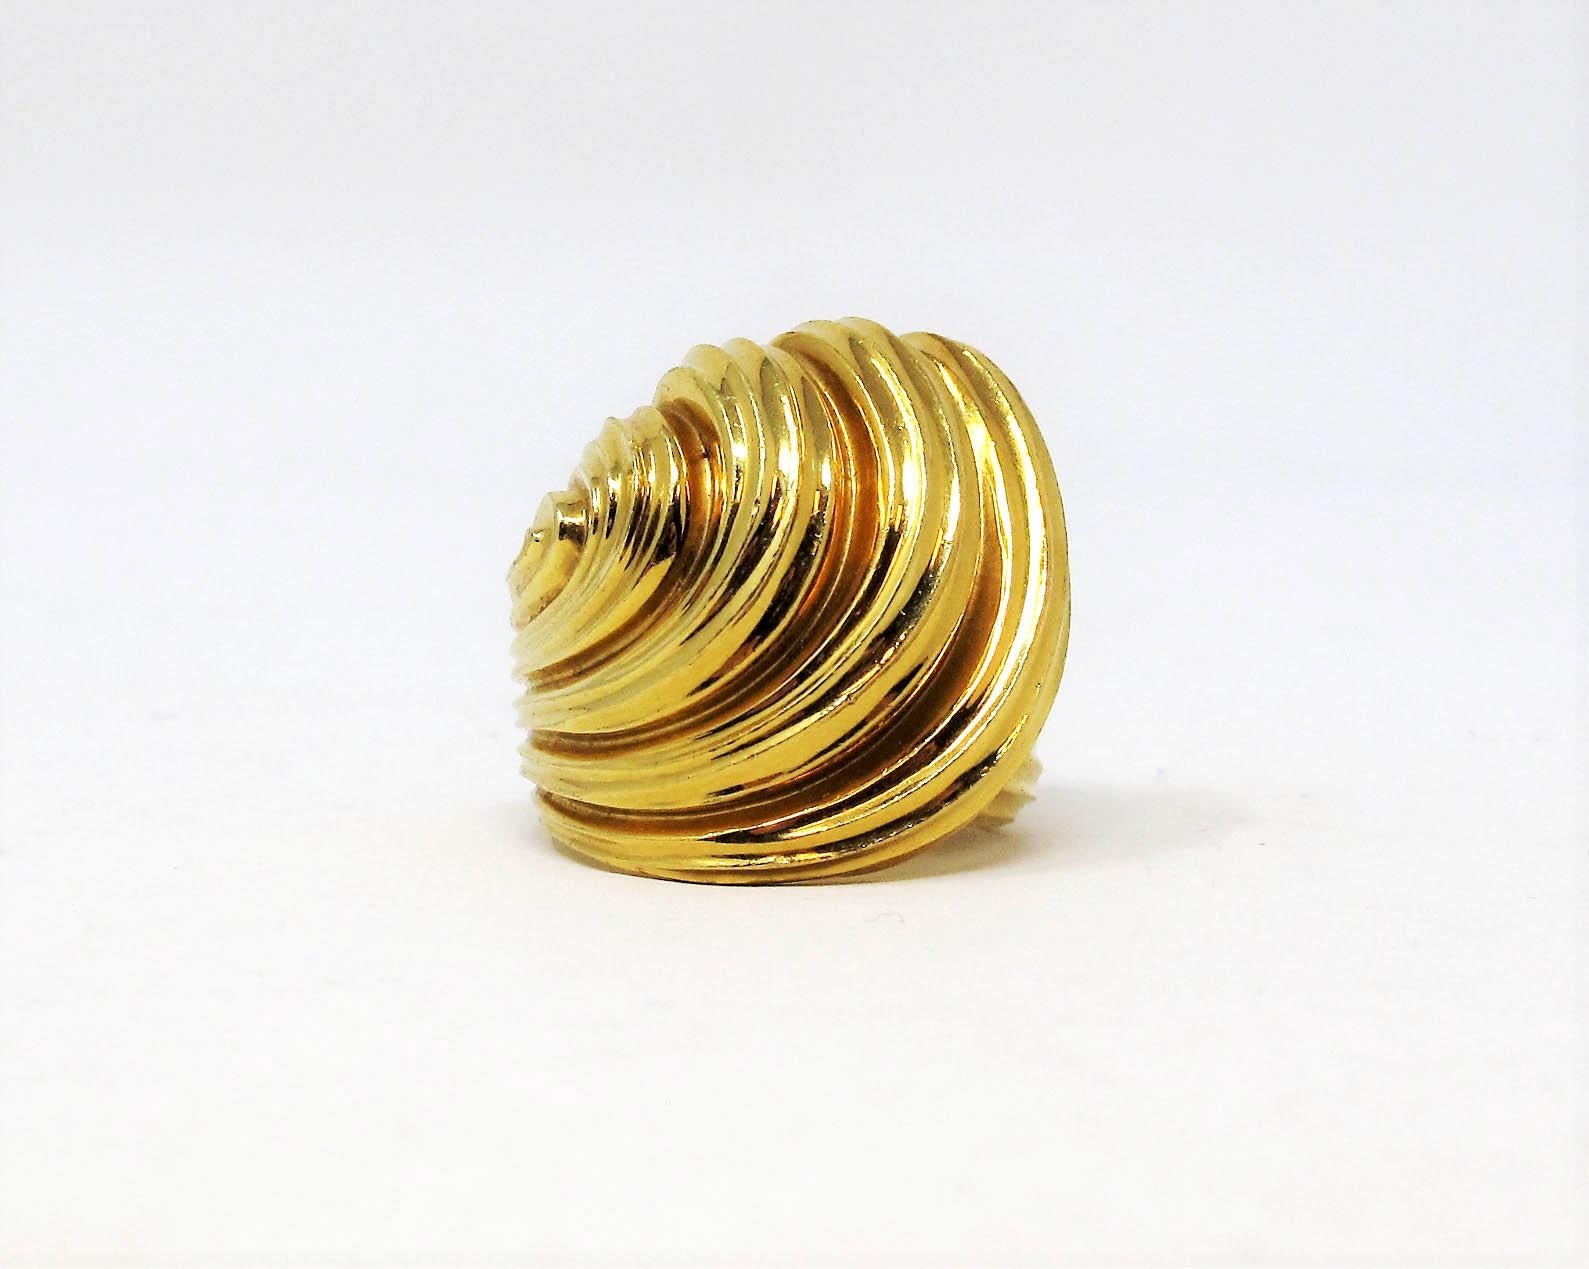 Ring size: 6.5

Uniquely textured 18 karat yellow gold cocktail ring by American jewelry designer, Henry Dunay. Bold in both size and design, this substantial dome ring offers stunning sophistication without being over the top, while the sleek